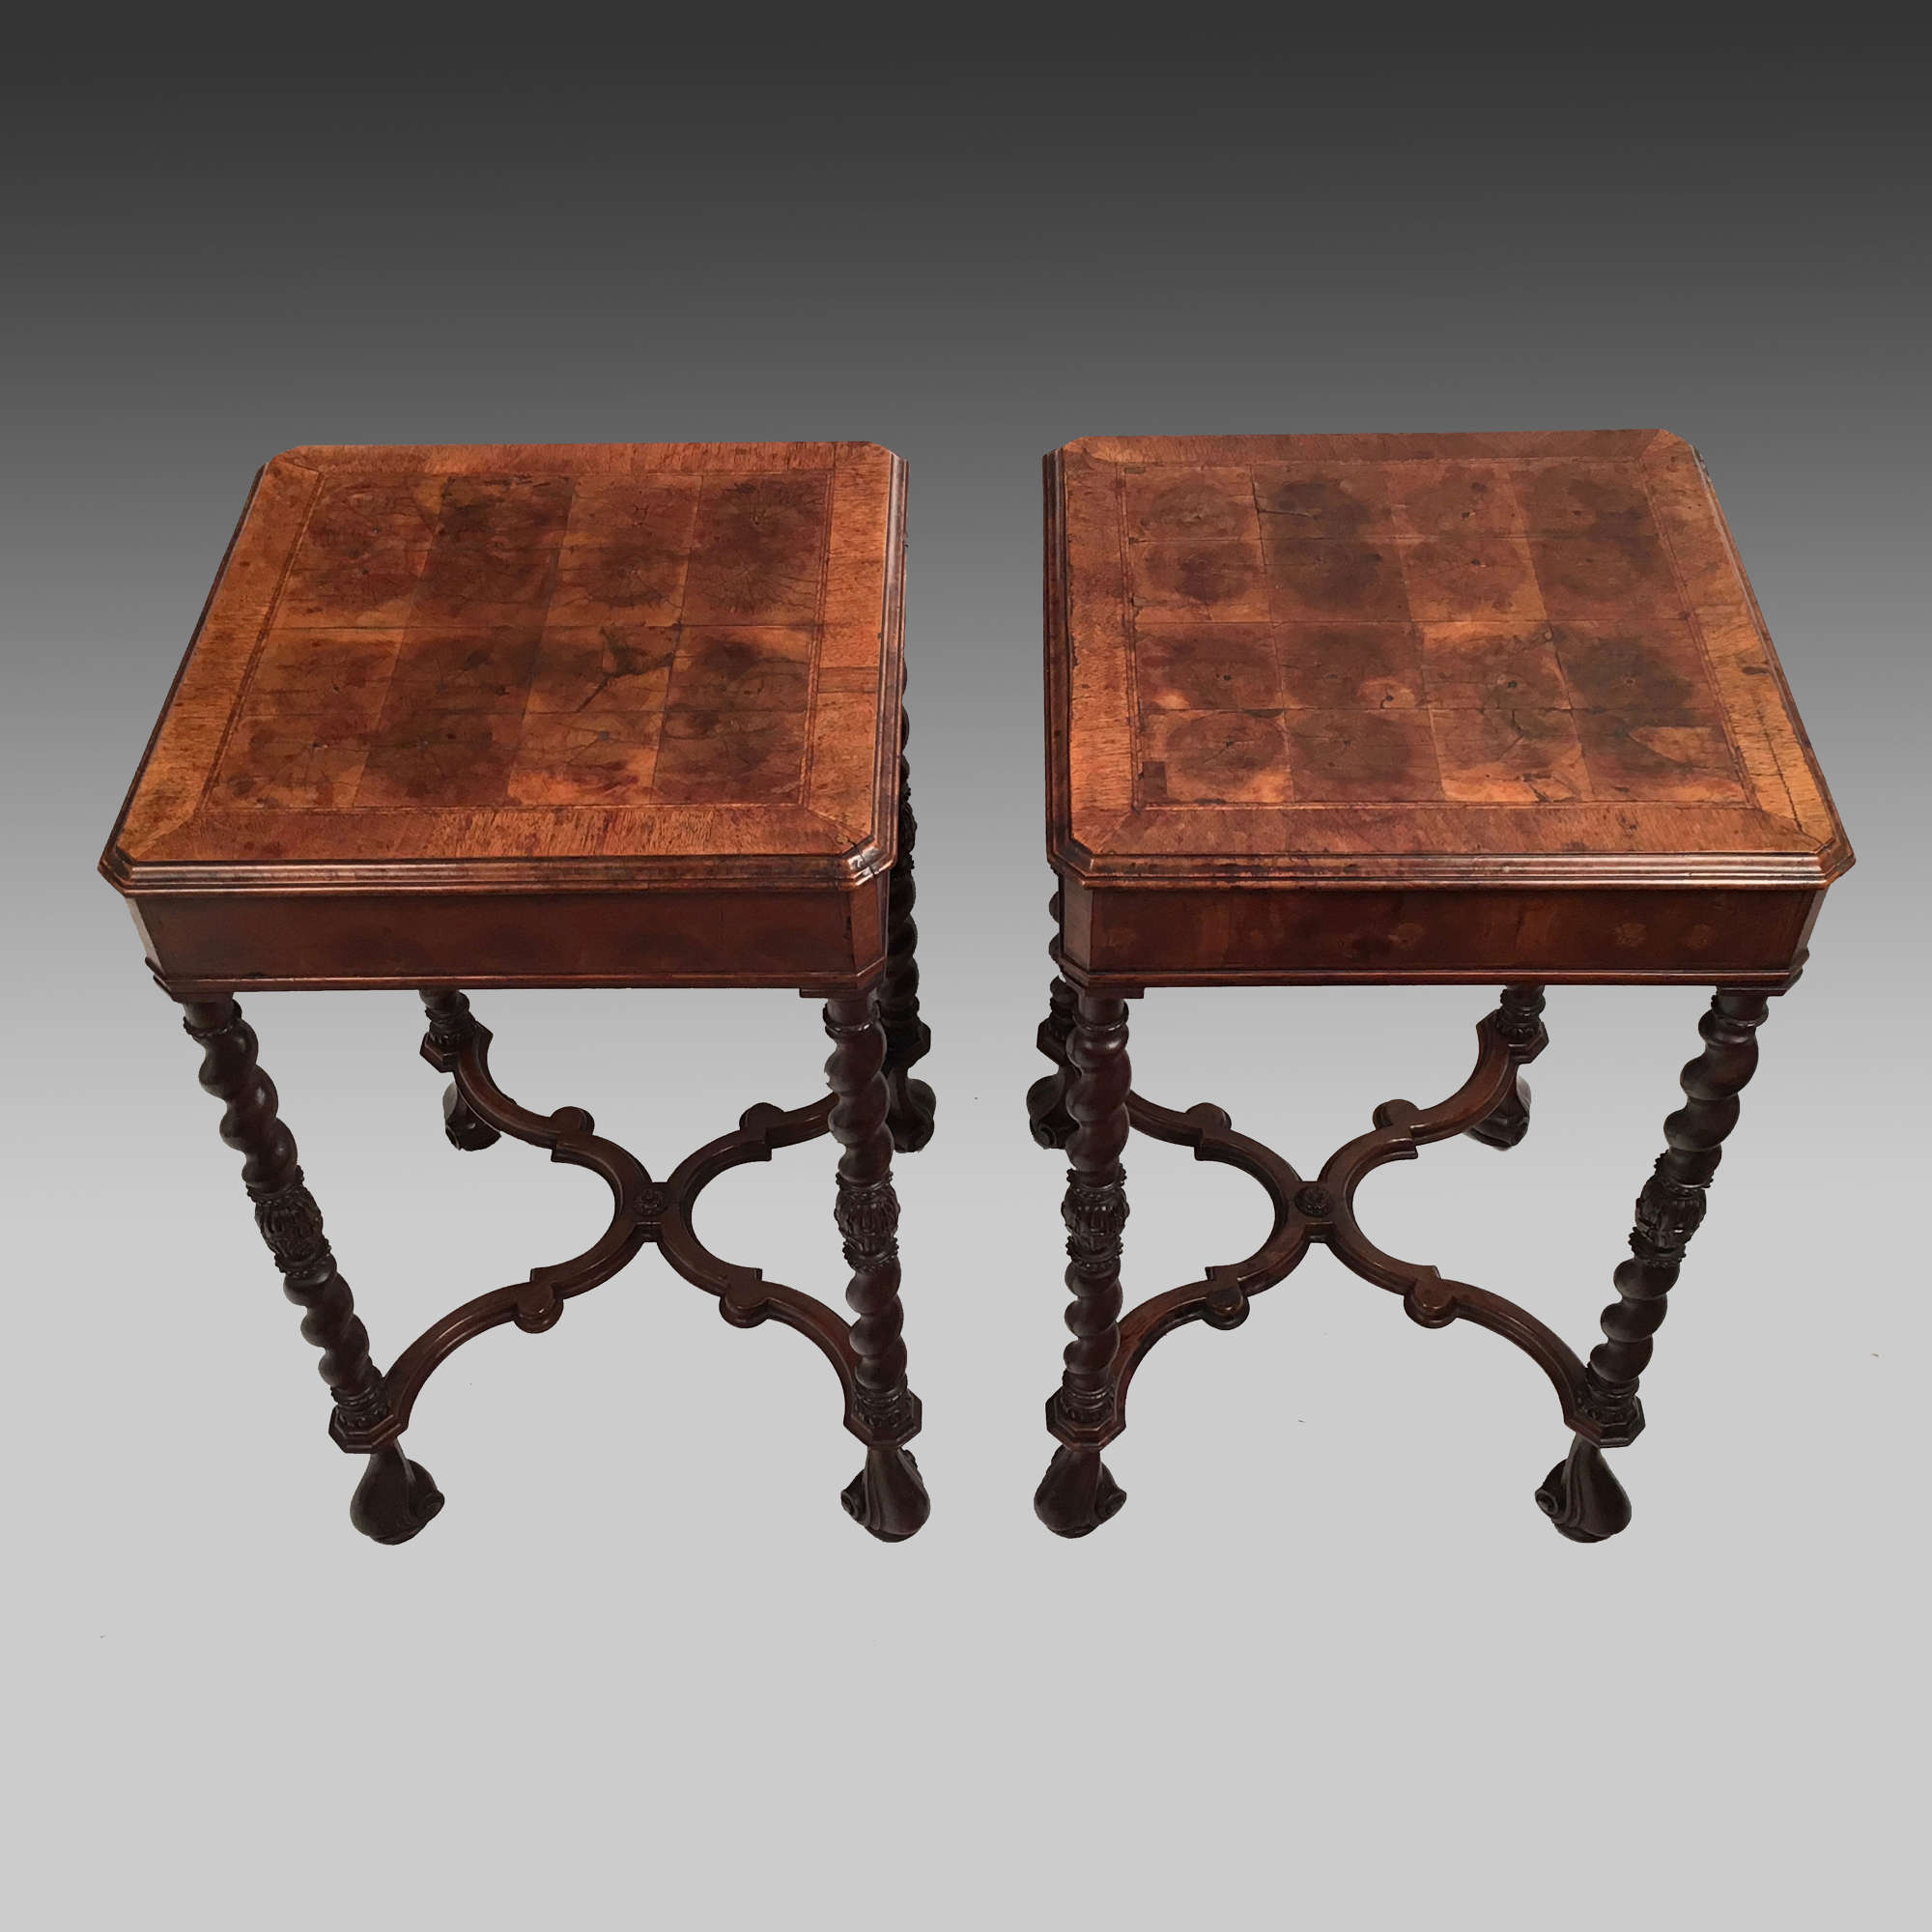 Pair of walnut occasional tables